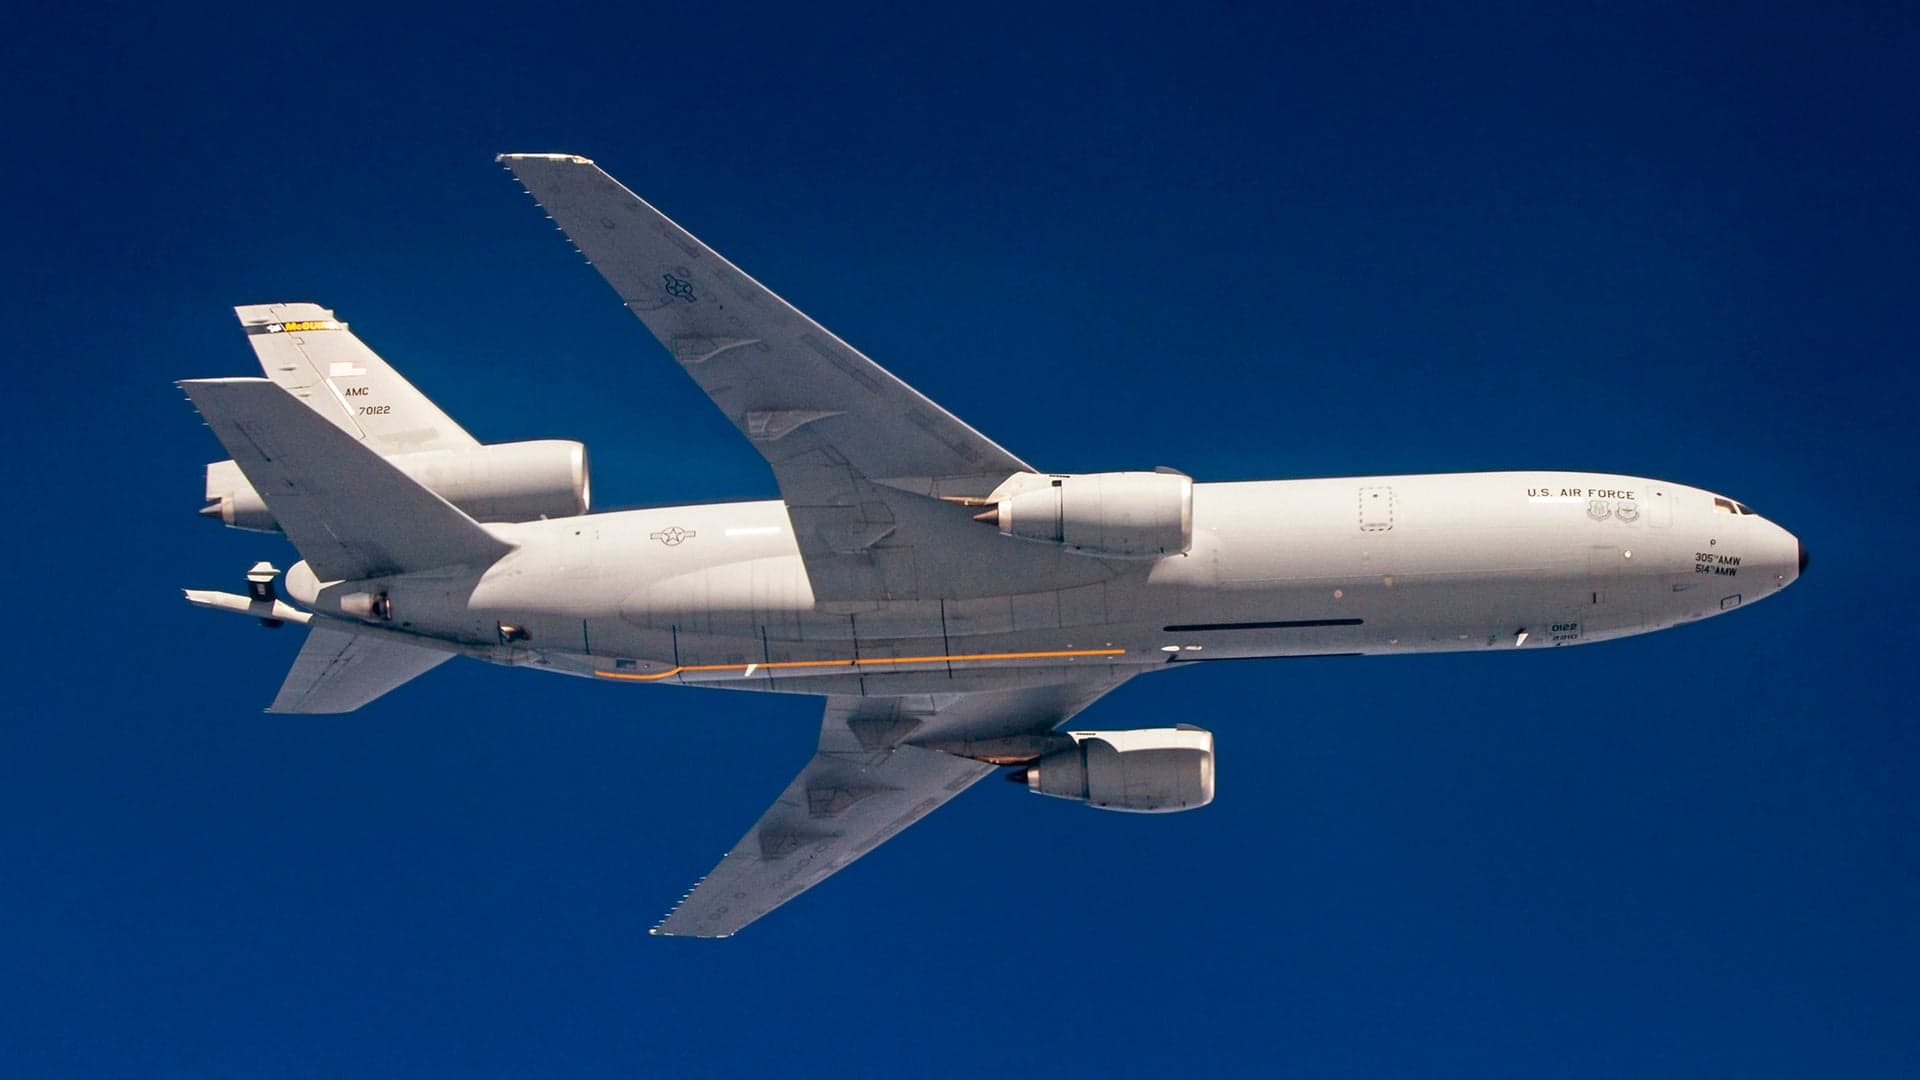 First KC-10 Extender Tanker Jet Heads To The Boneyard For Retirement (Updated)